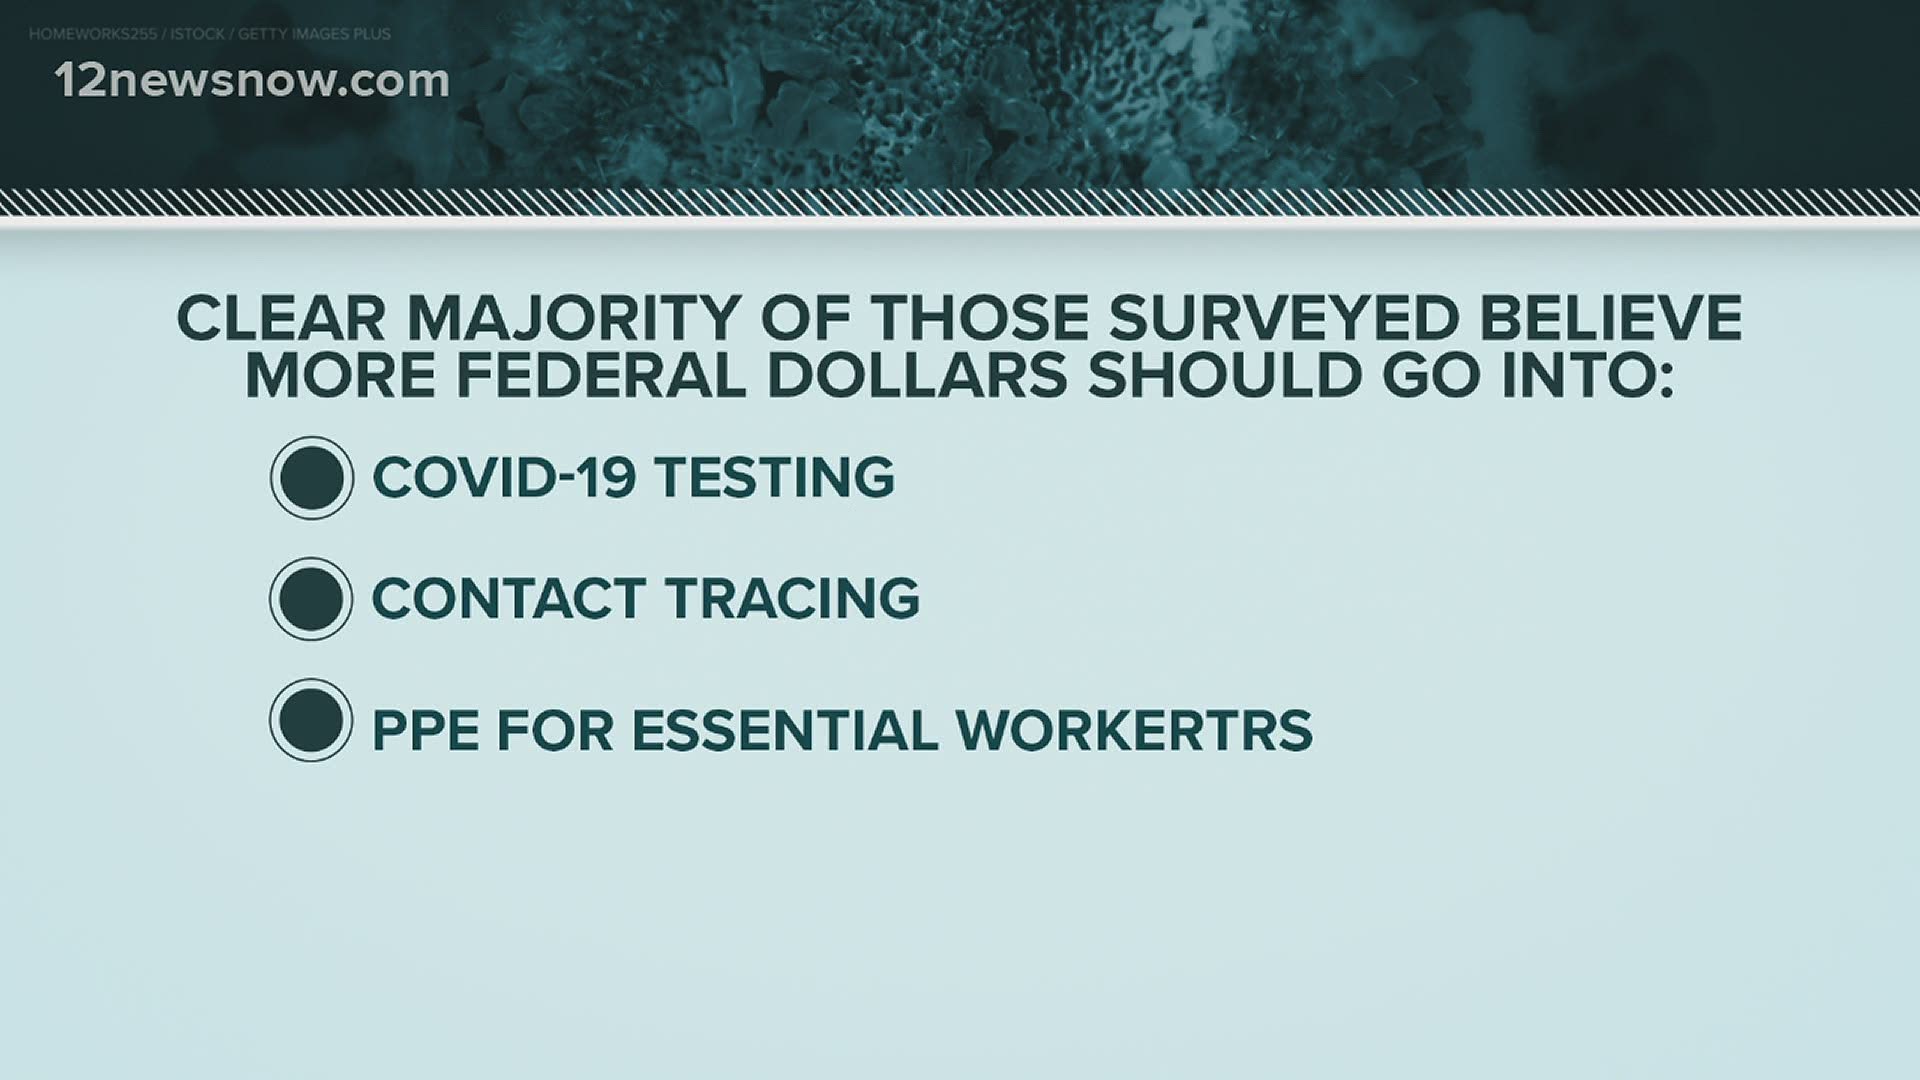 7 in 10 people rated the federal government's response as fair or poor